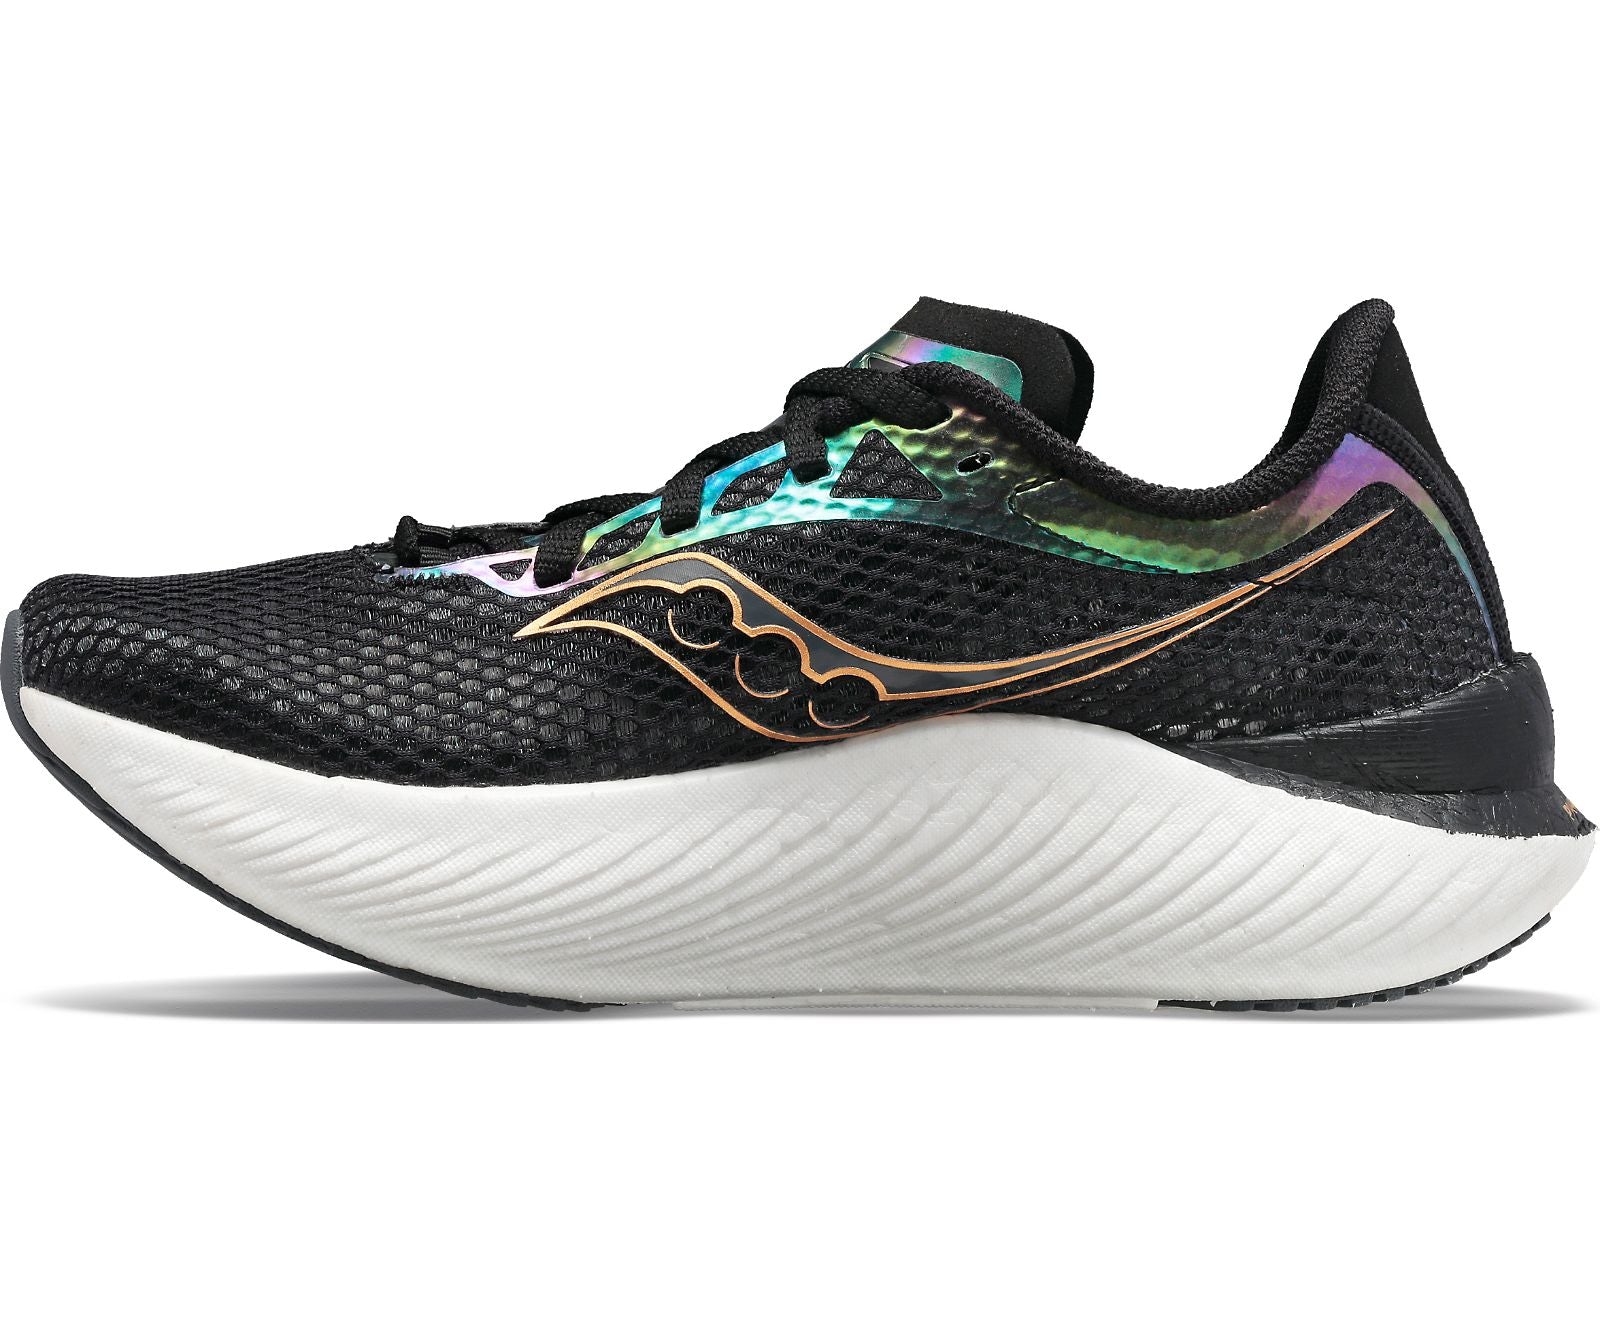 Medial view of the Women's Endorphin Pro 3 by Saucony in the color Black/Goldstruck